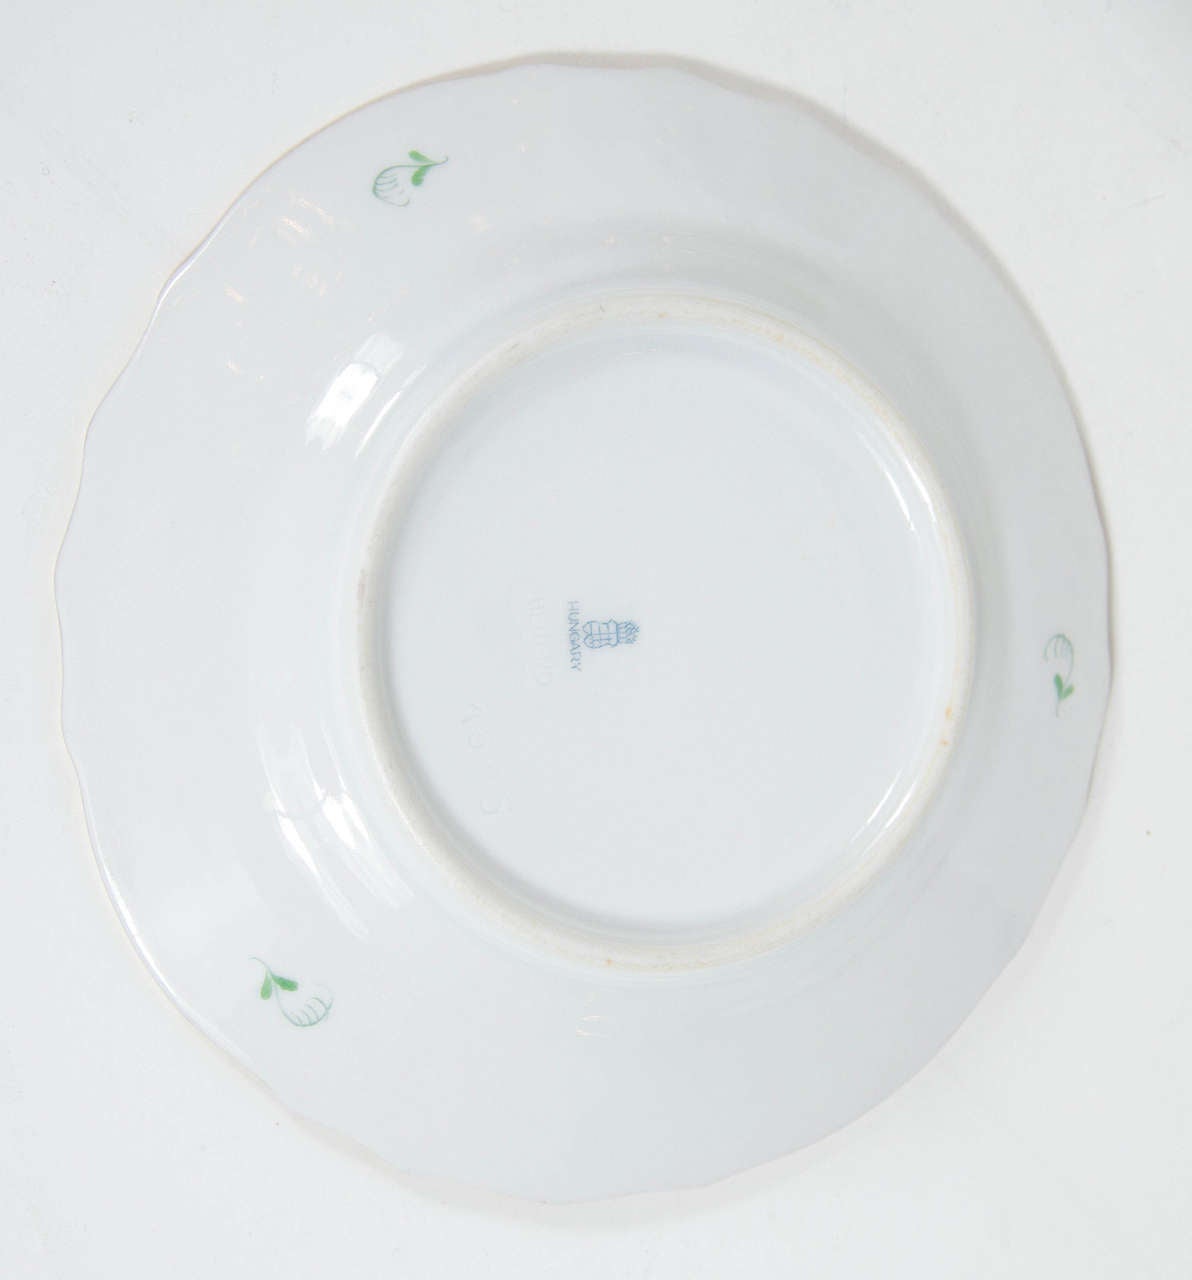 Exquisite Set of 8 Dinner and Horderves Plates by Herend 3